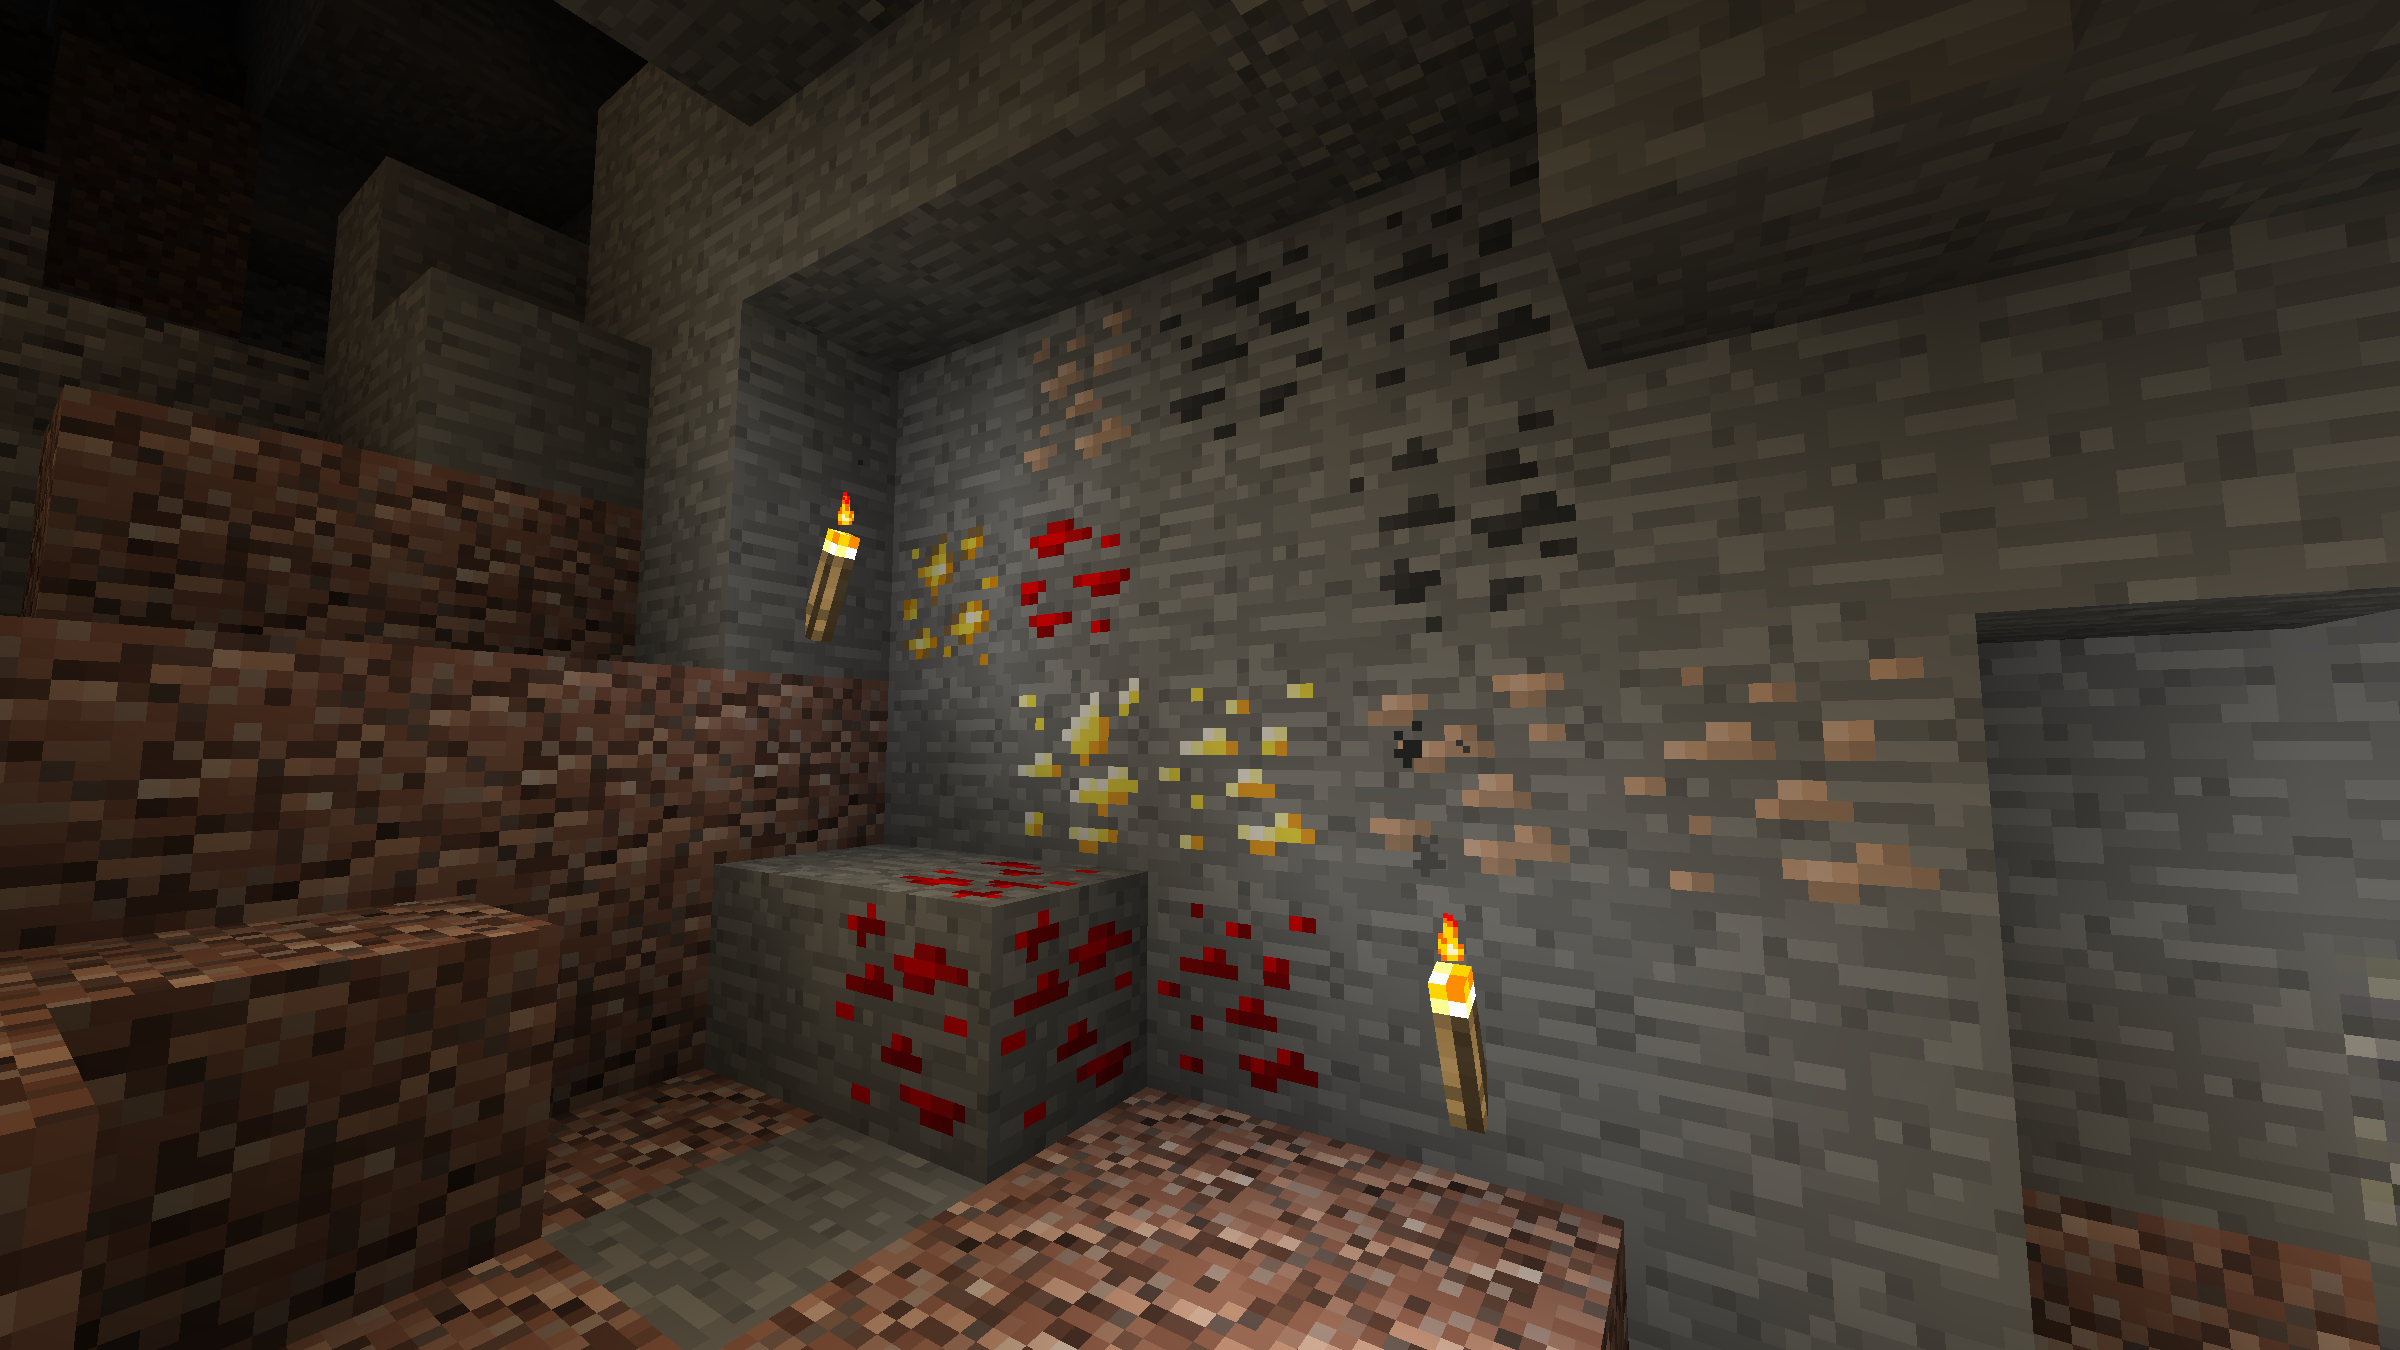 Shows all the ore textures